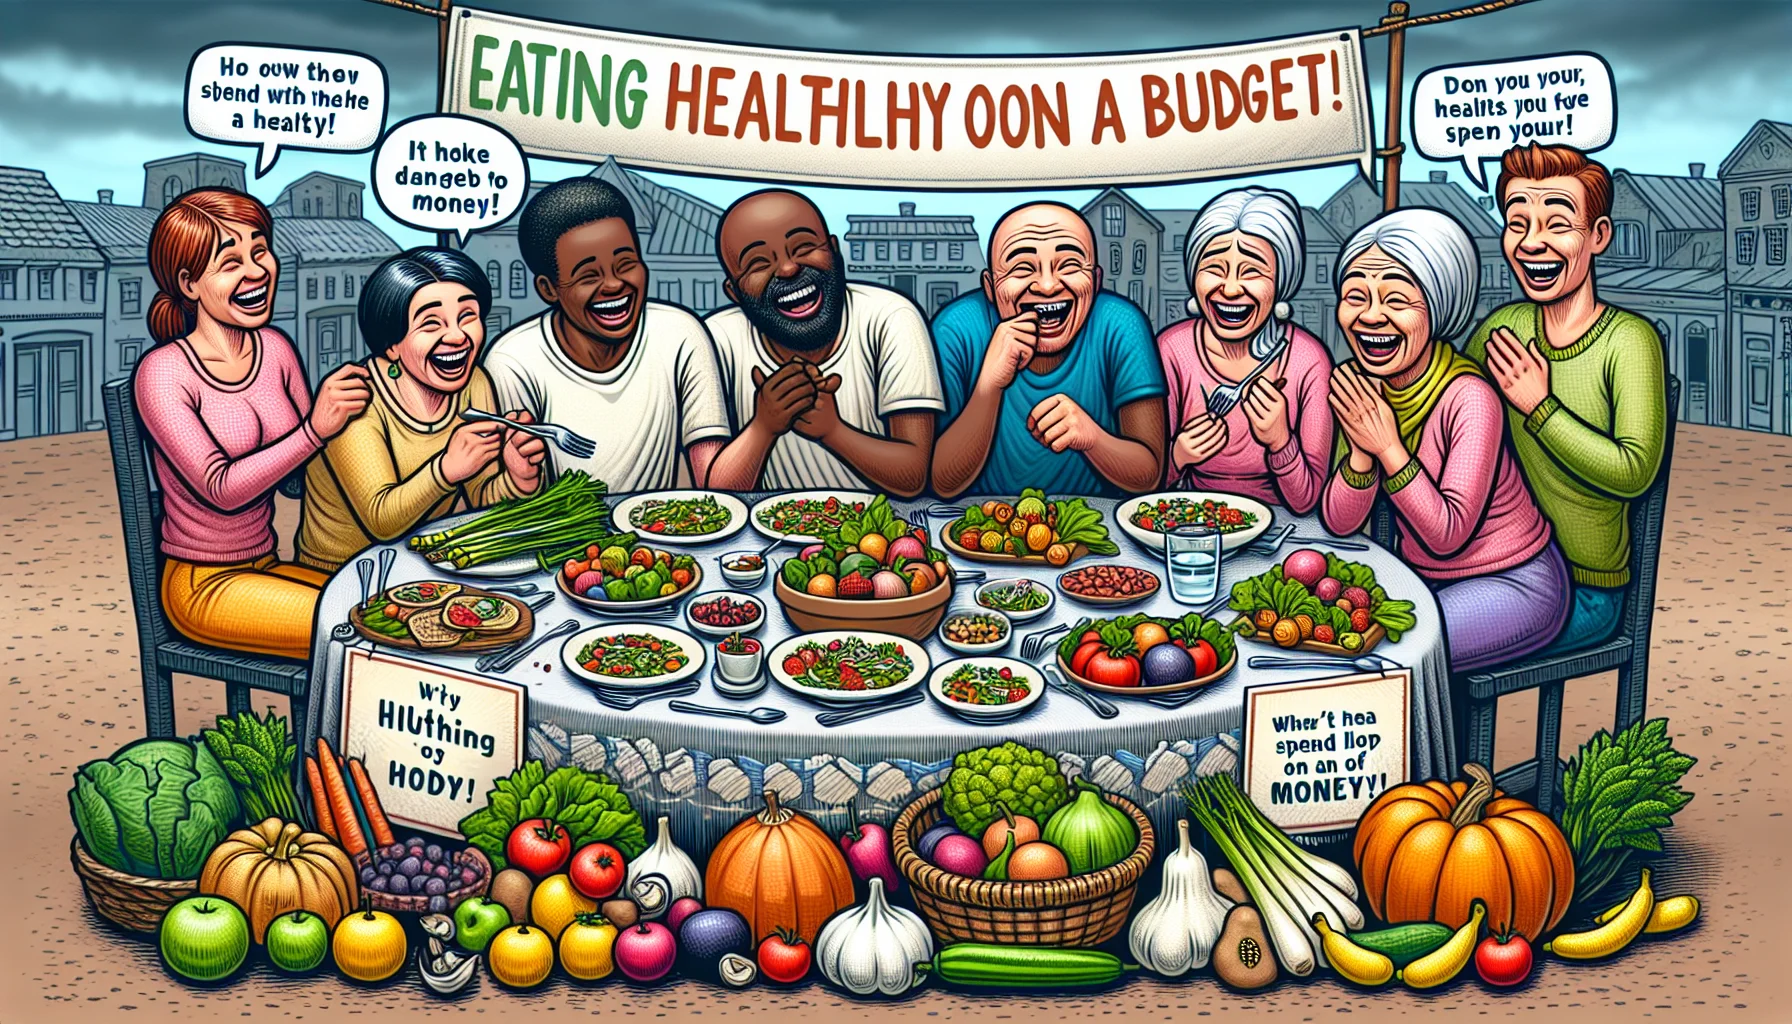 Create a detailed image of a humorous scenario that encourages people to eat healthily without spending a lot of money. The scene includes people of diverse descents such as a Black man, a Caucasian woman, a Hispanic elderly woman, and a Middle-Eastern young man. They are all laughing around a table filled with colorful, fresh produce purchased from a local market. The table is also adorned, not with pricey dishes, but with simple, healthy meals made from the fresh produce. There are signs and banners around them with catchy phrases related to eating healthy on a budget.